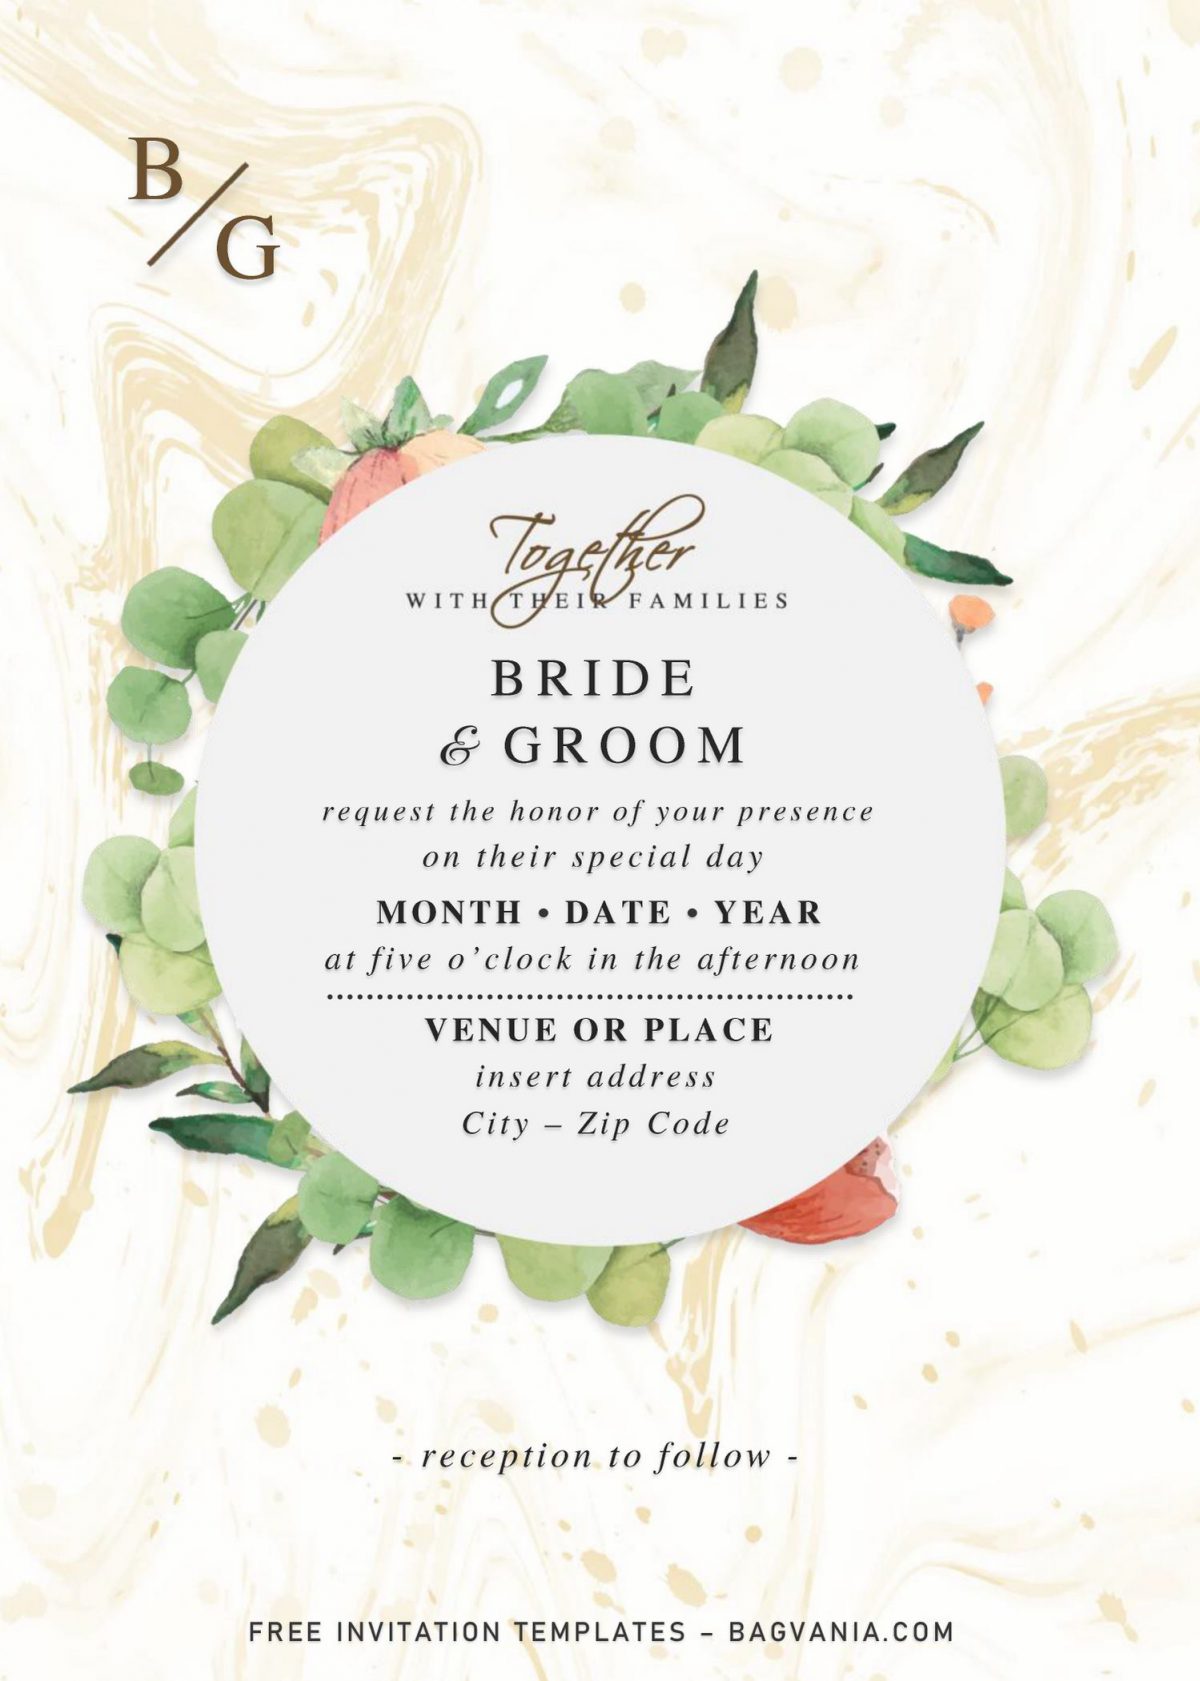 Free Vintage Floral Wedding Invitation Templates For Word and has white and gold marble background